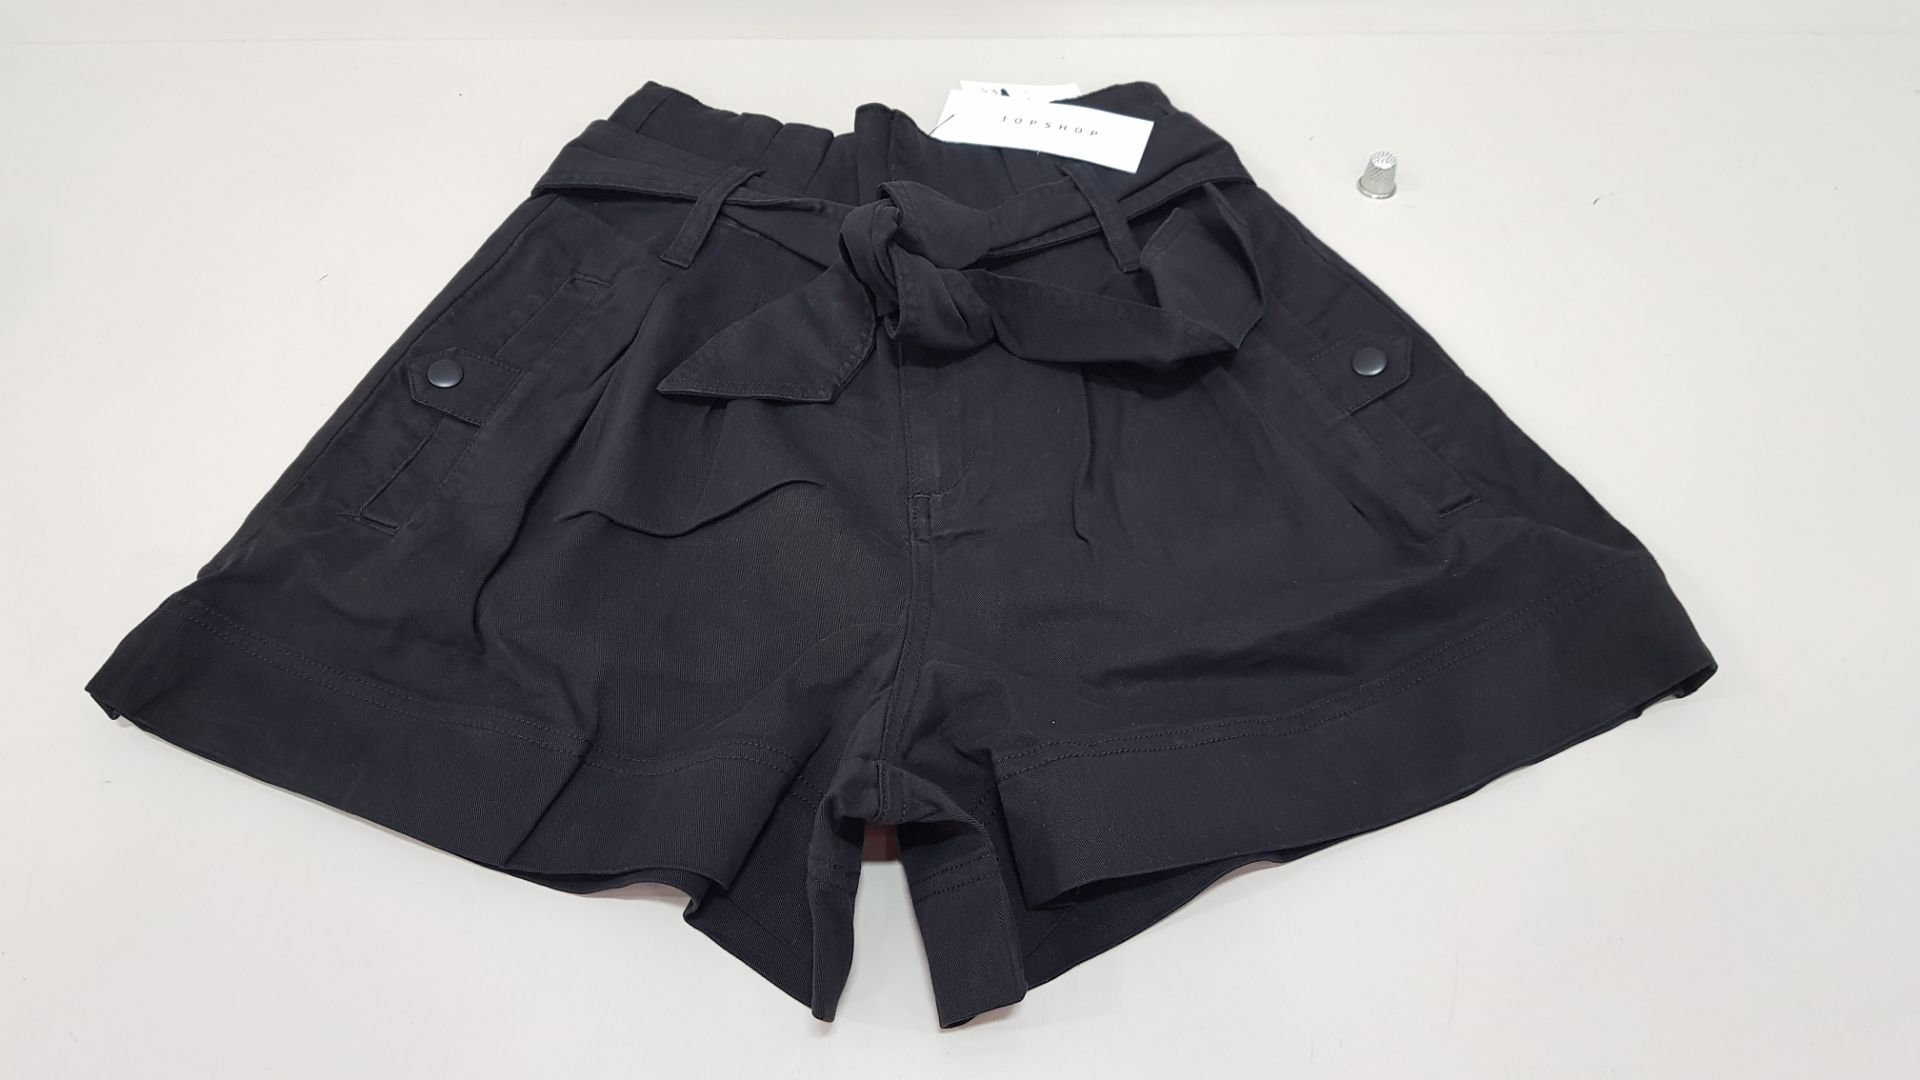 15 X BRAND NEW TOPSHOP SHORTS UK SIZE 8 RRP £29.00 (TOTAL RRP £435.00)